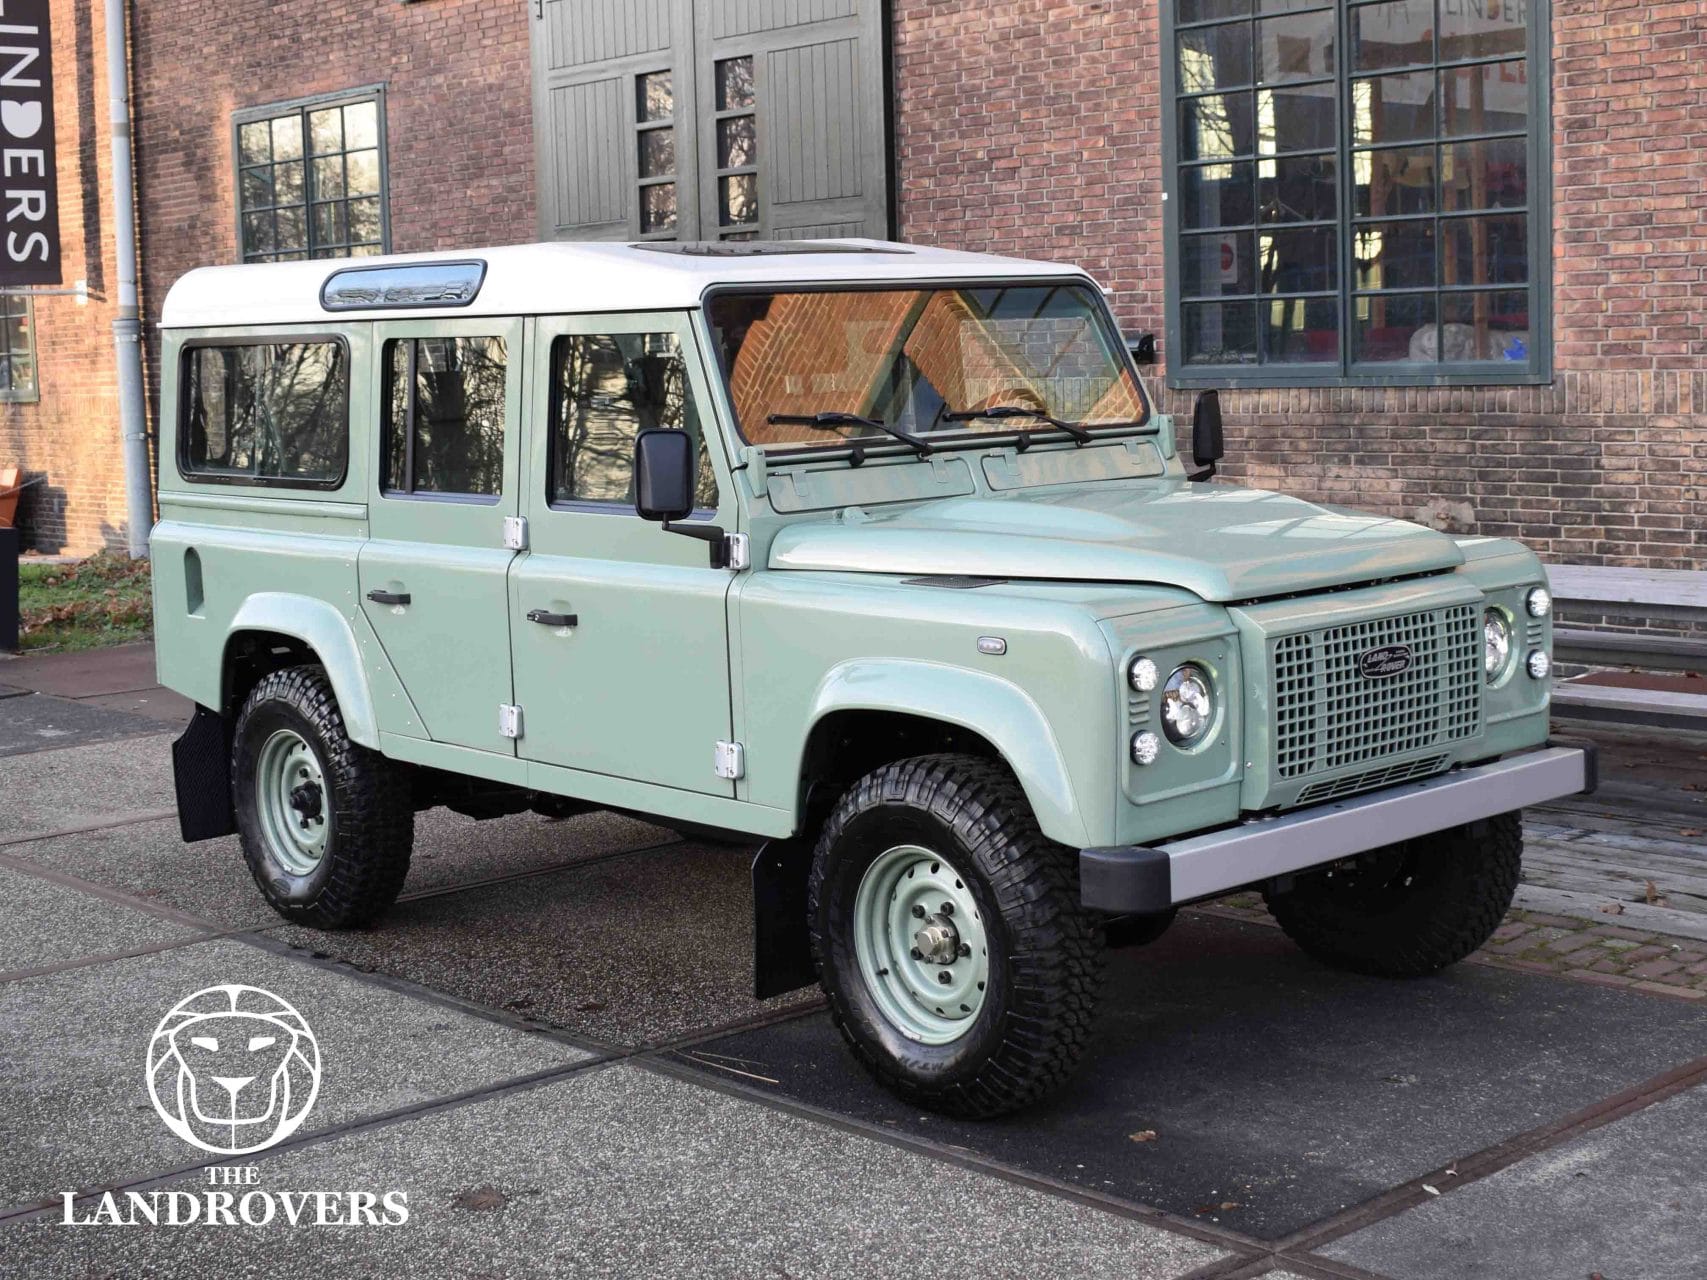 Edition The Landrovers